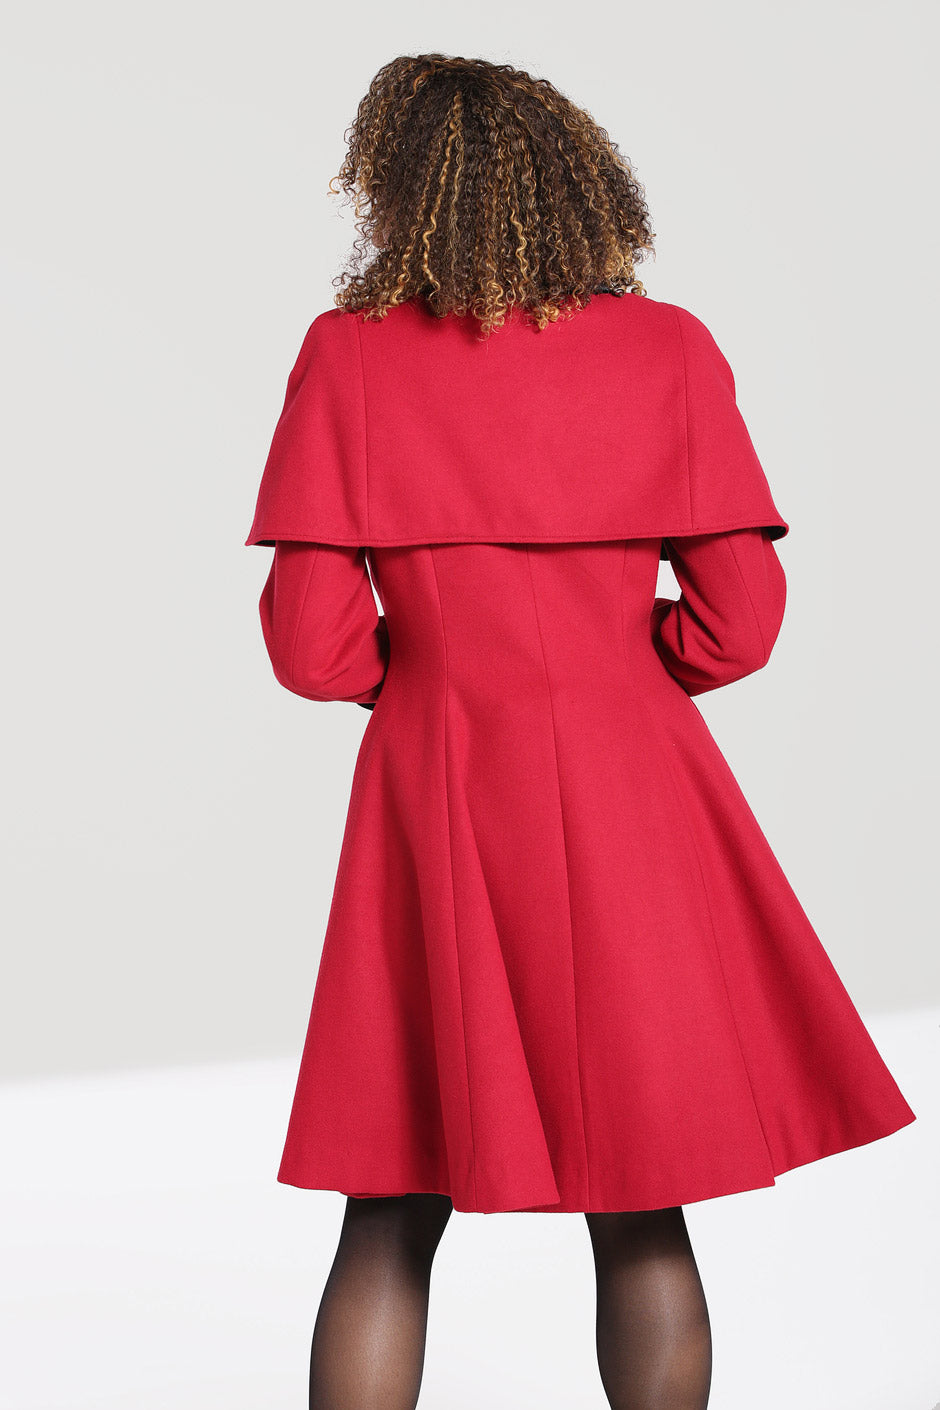 Curly haired woman facing away from the camera wearing a red vintage coat with a short cape around her shoulders